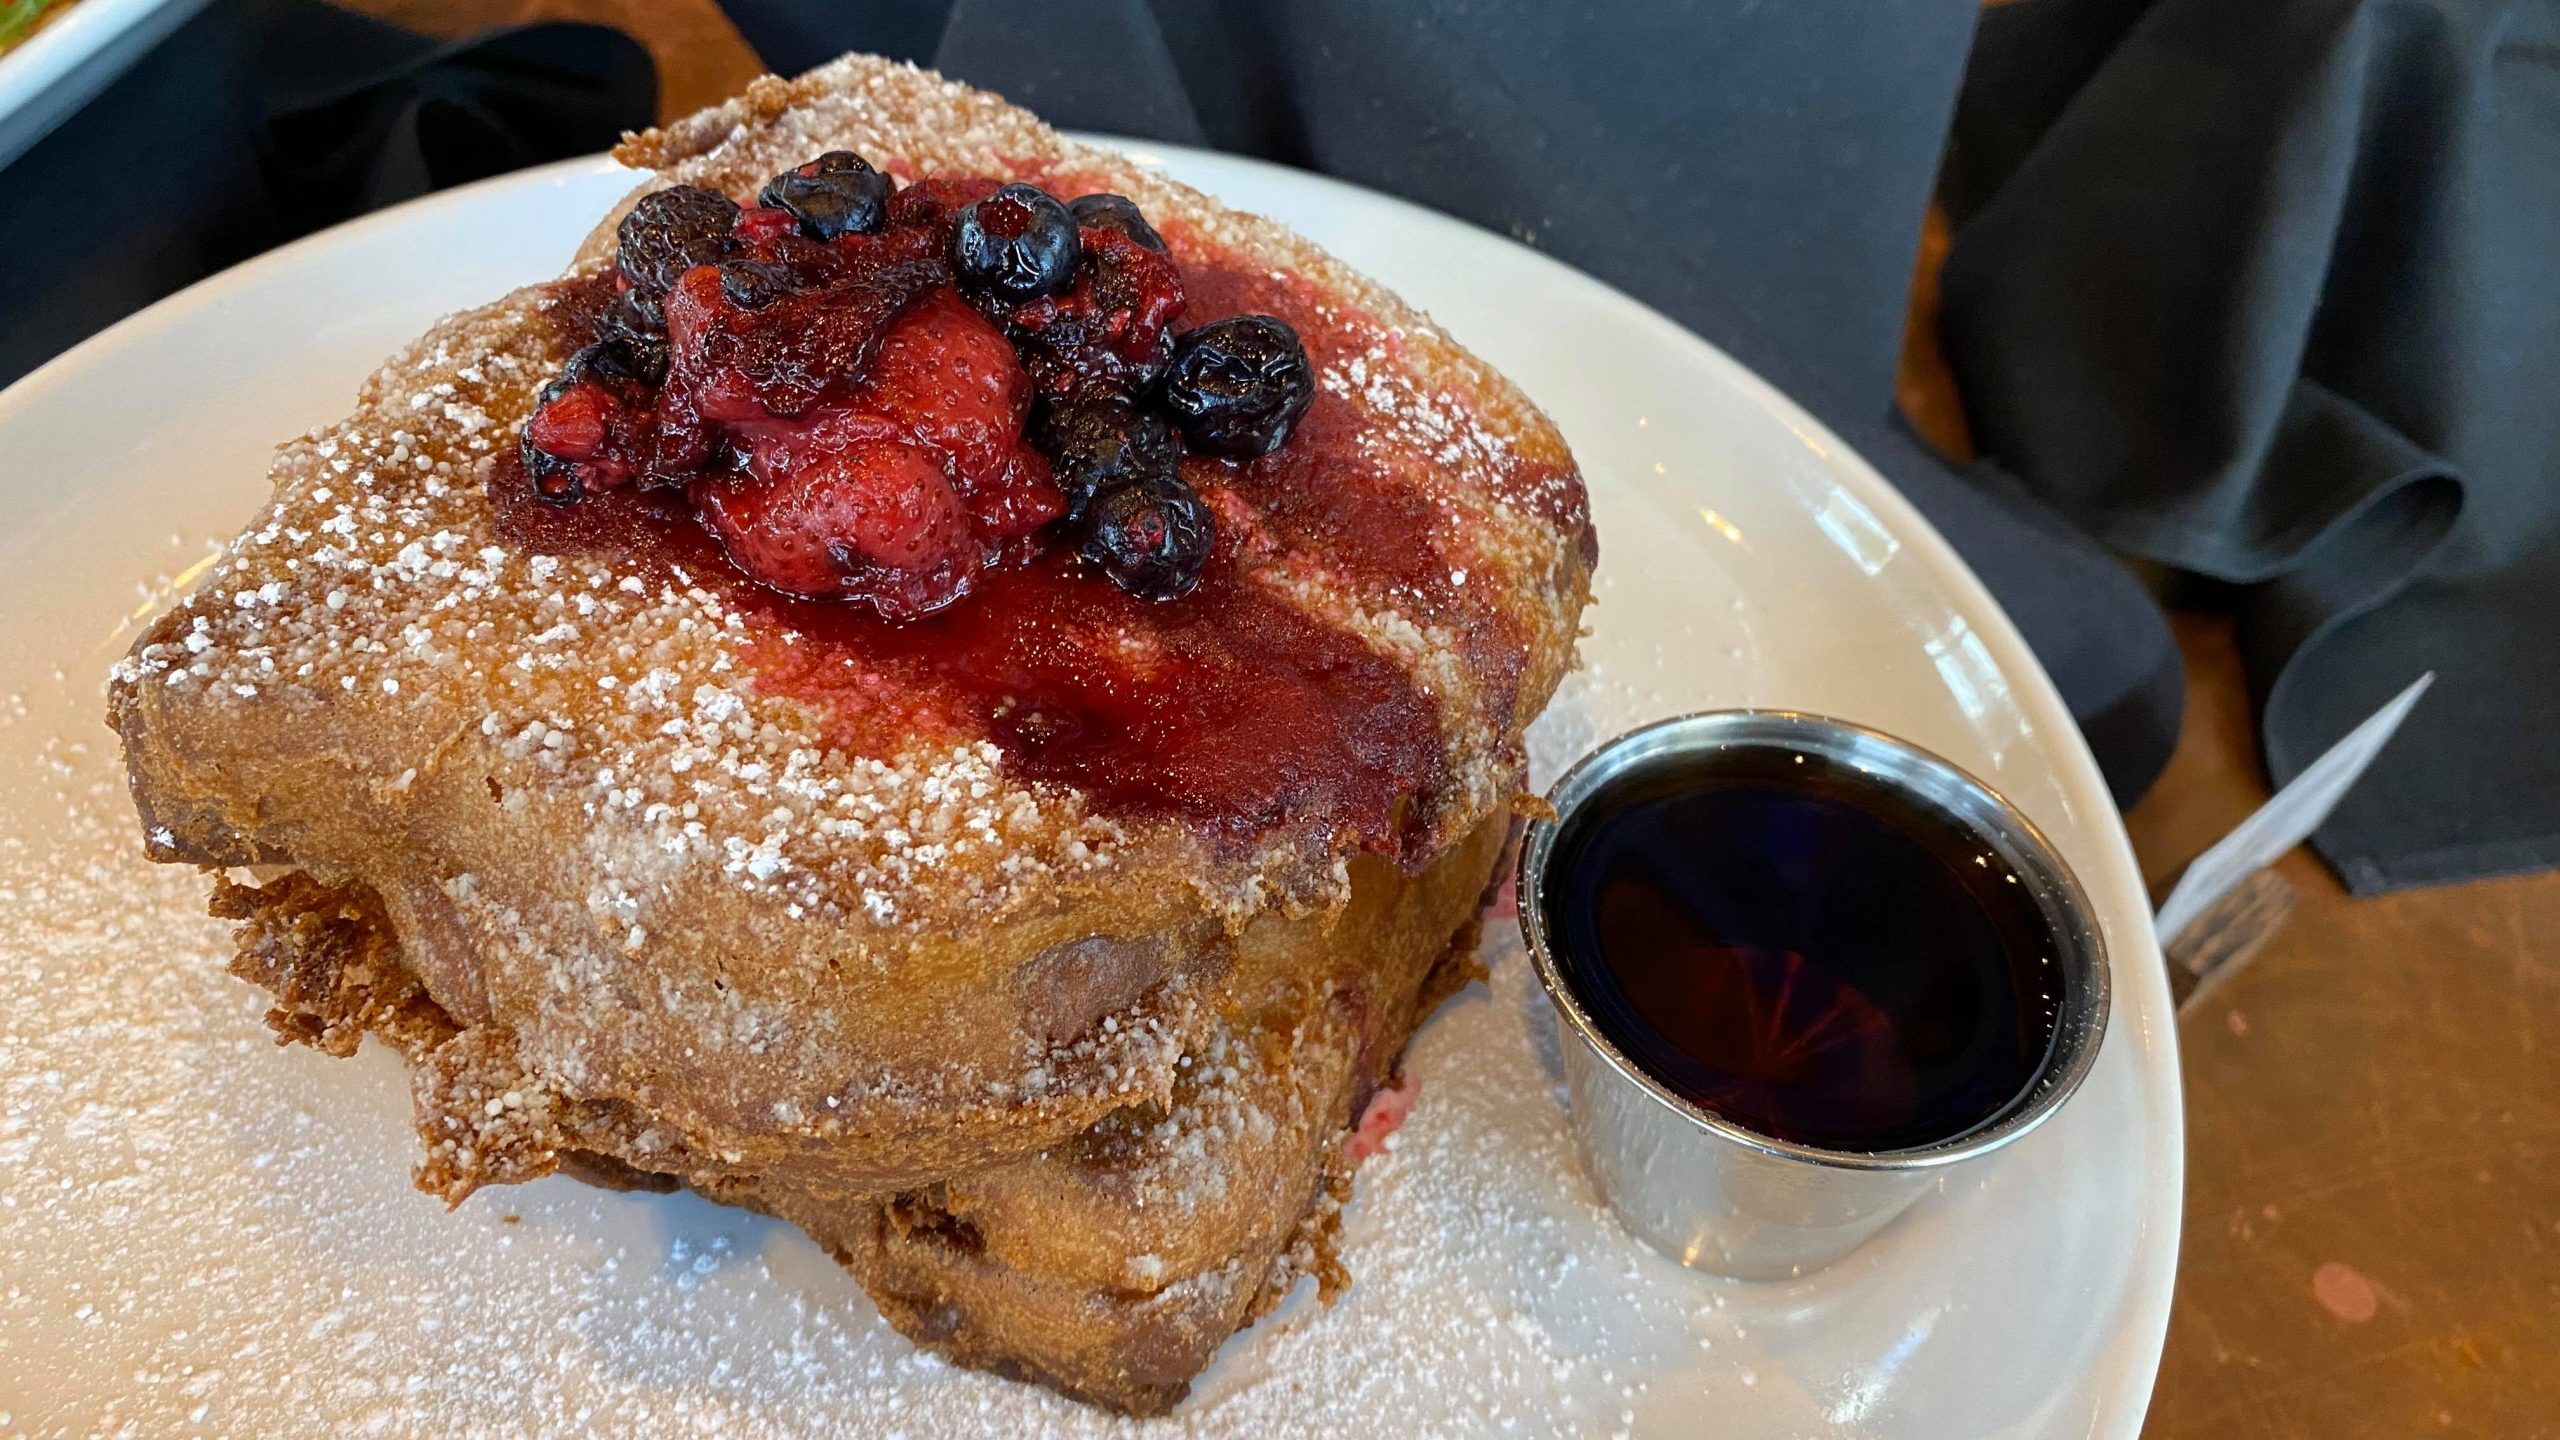 City Work Brunch at Disney Springs Might Be Your New Favorite Spot!